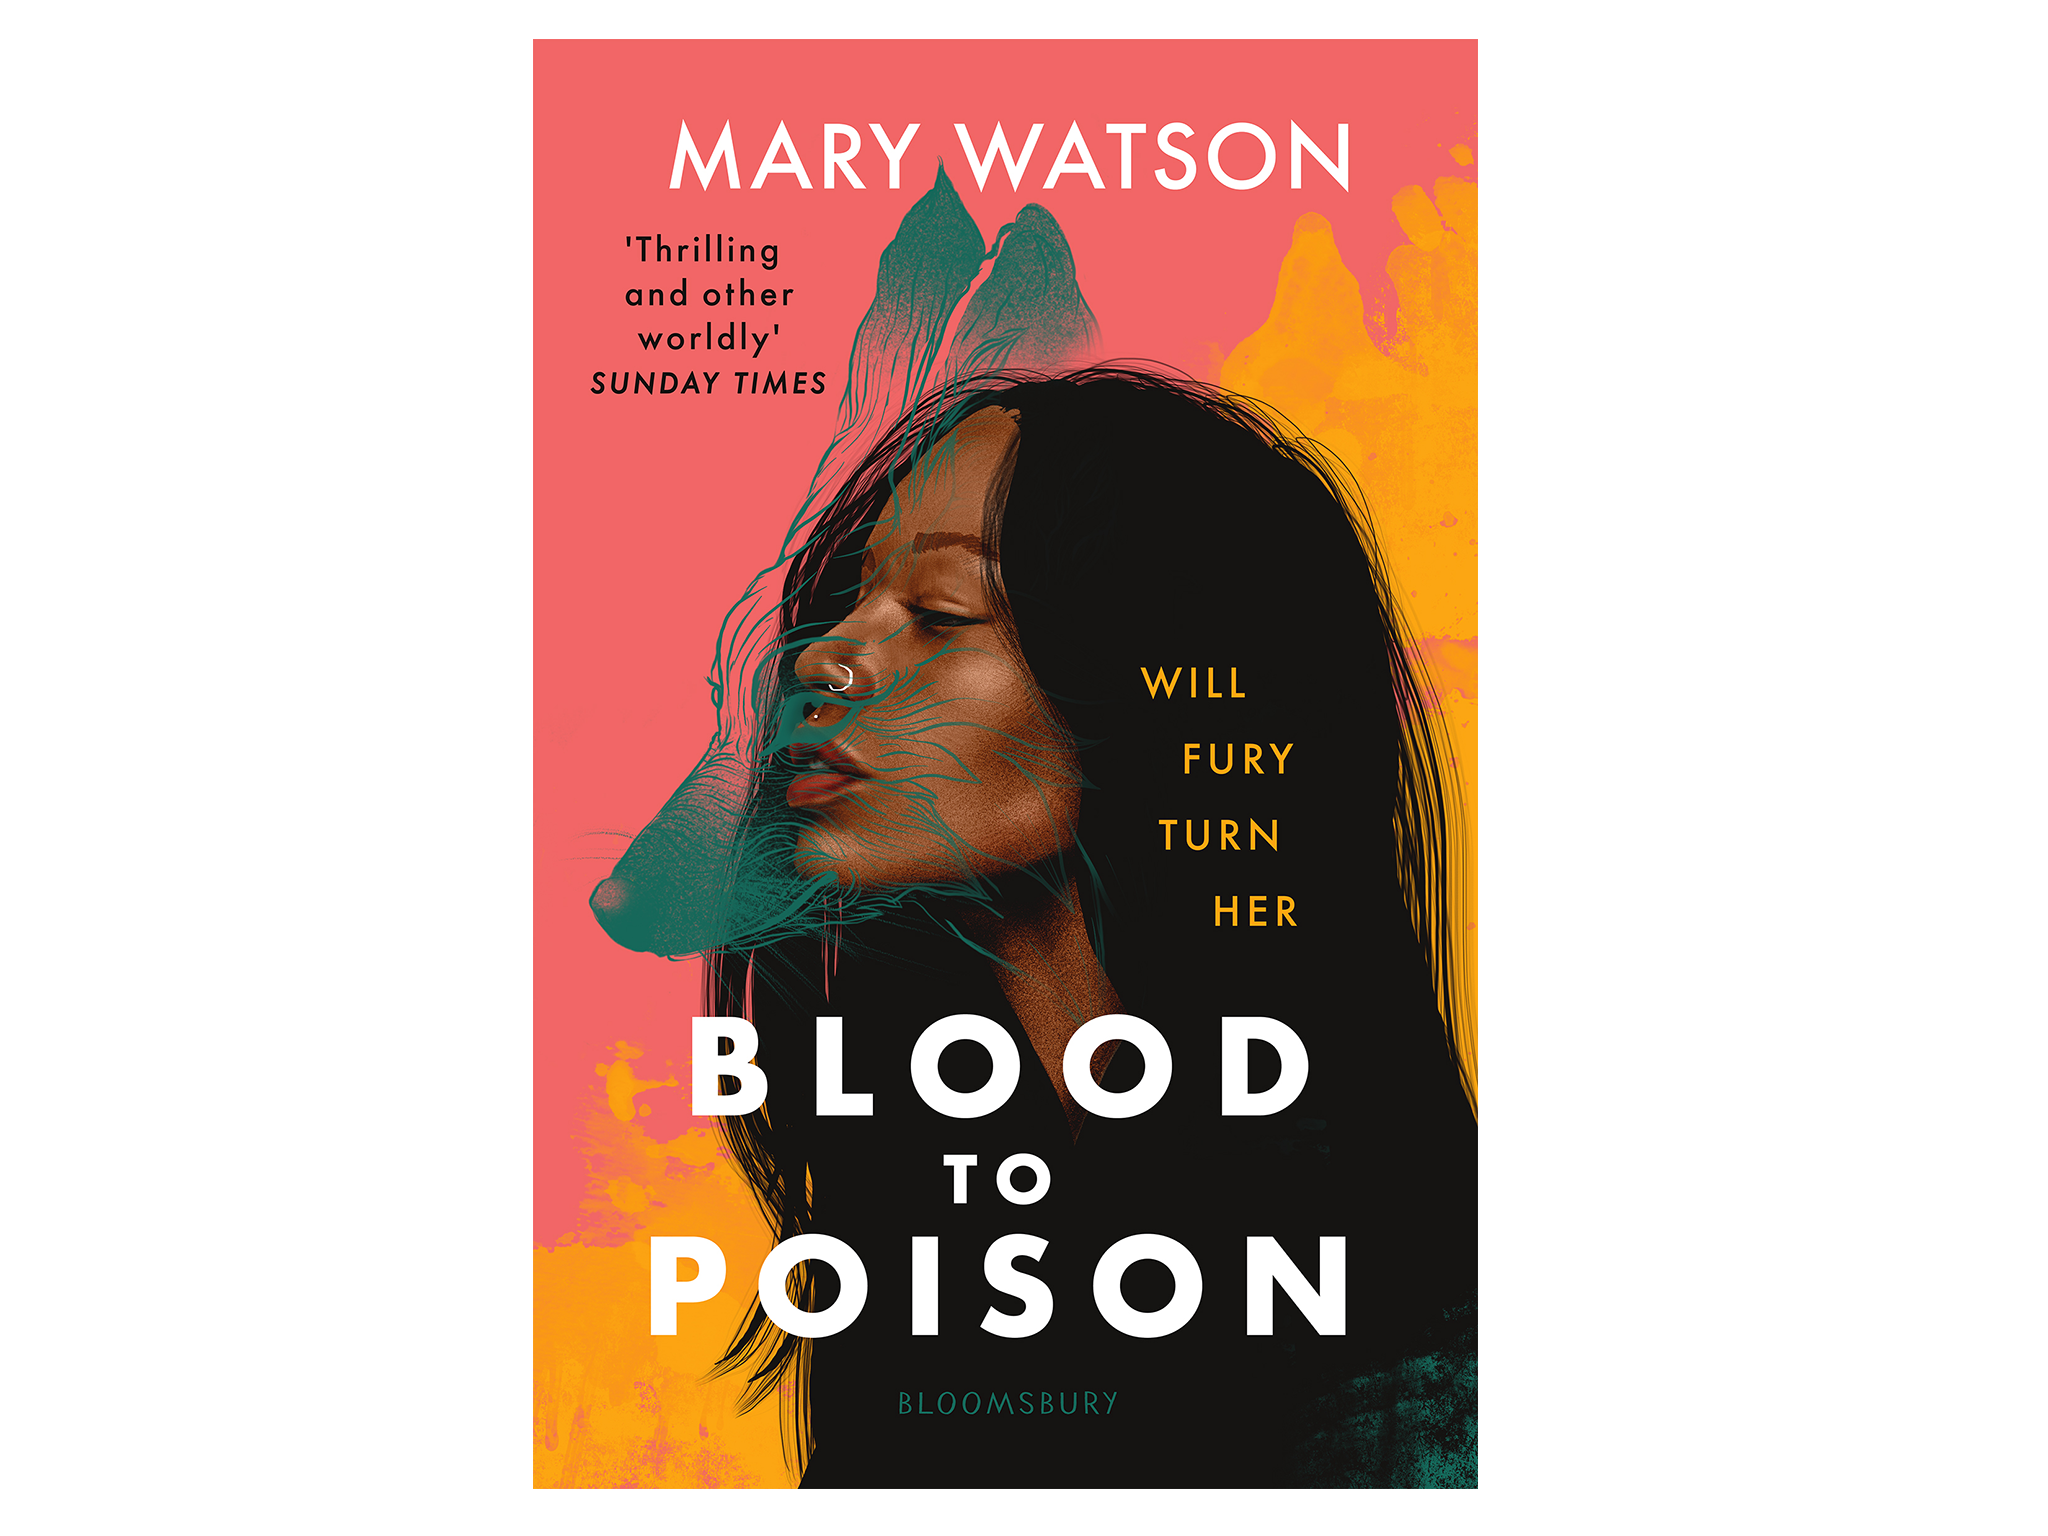 Blood to Poison by Mary Watson